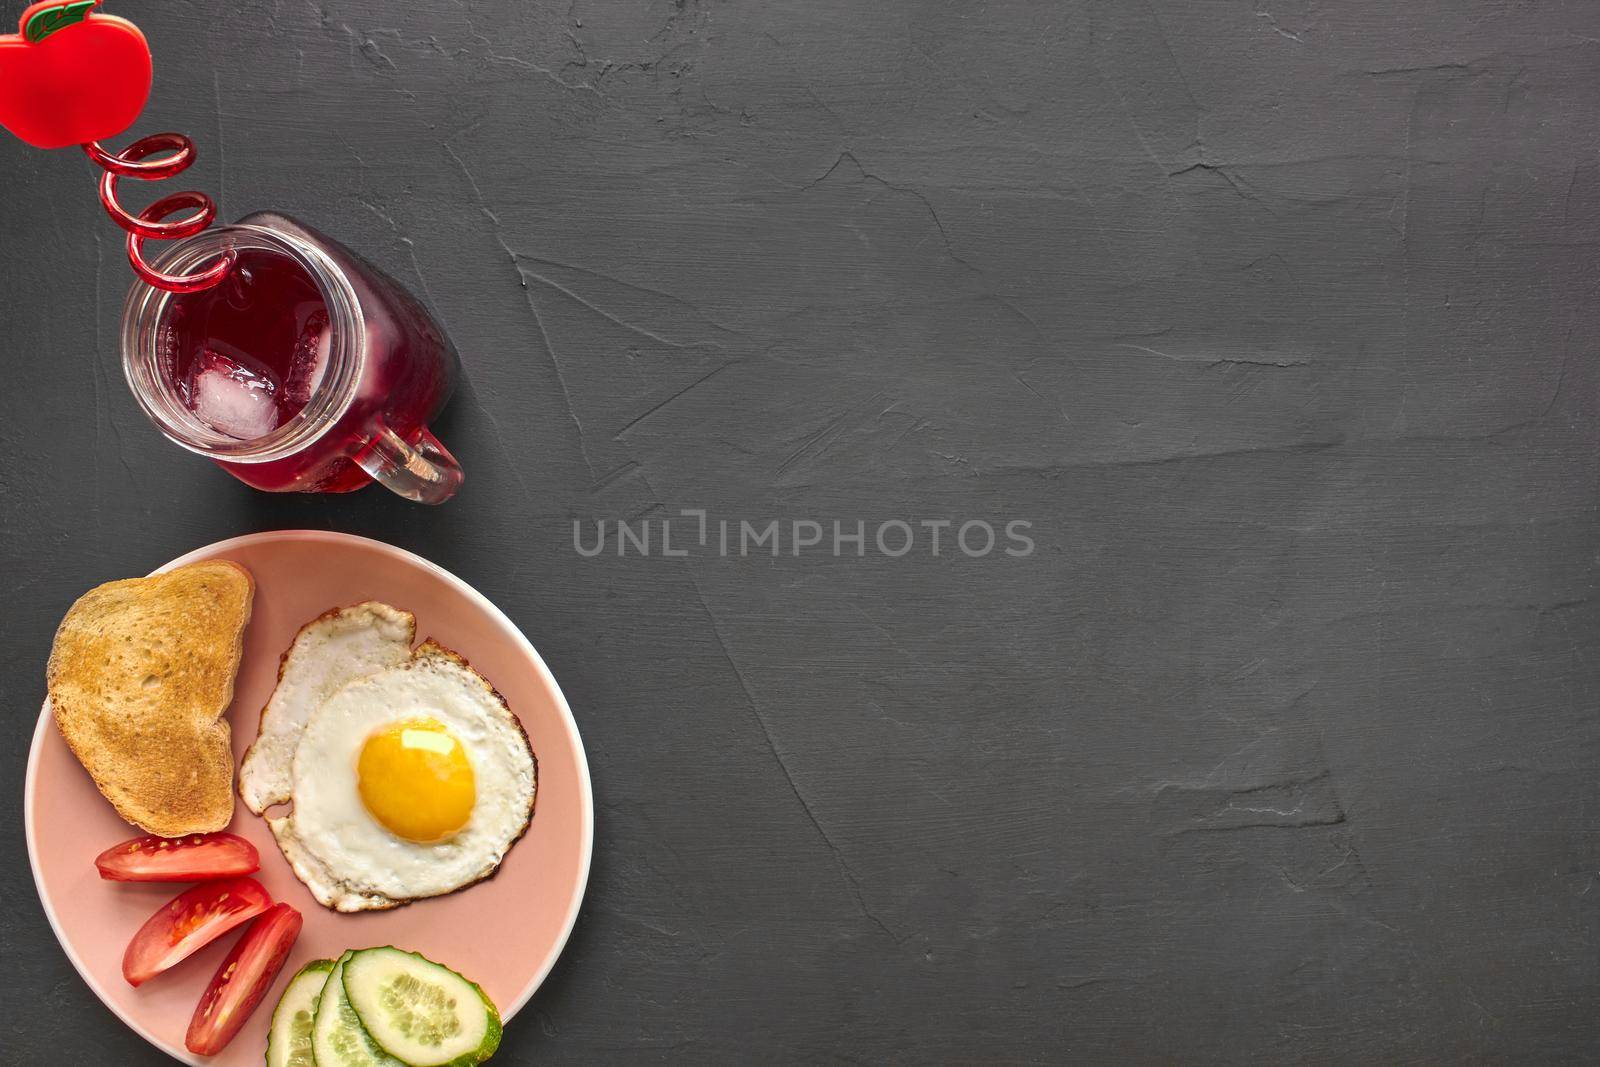 Top view of healthy and delicious breakfast on a black background with copy space. Fresh vegetables, scrambled eggs, toast, beverage for tasty and nutritious meal.